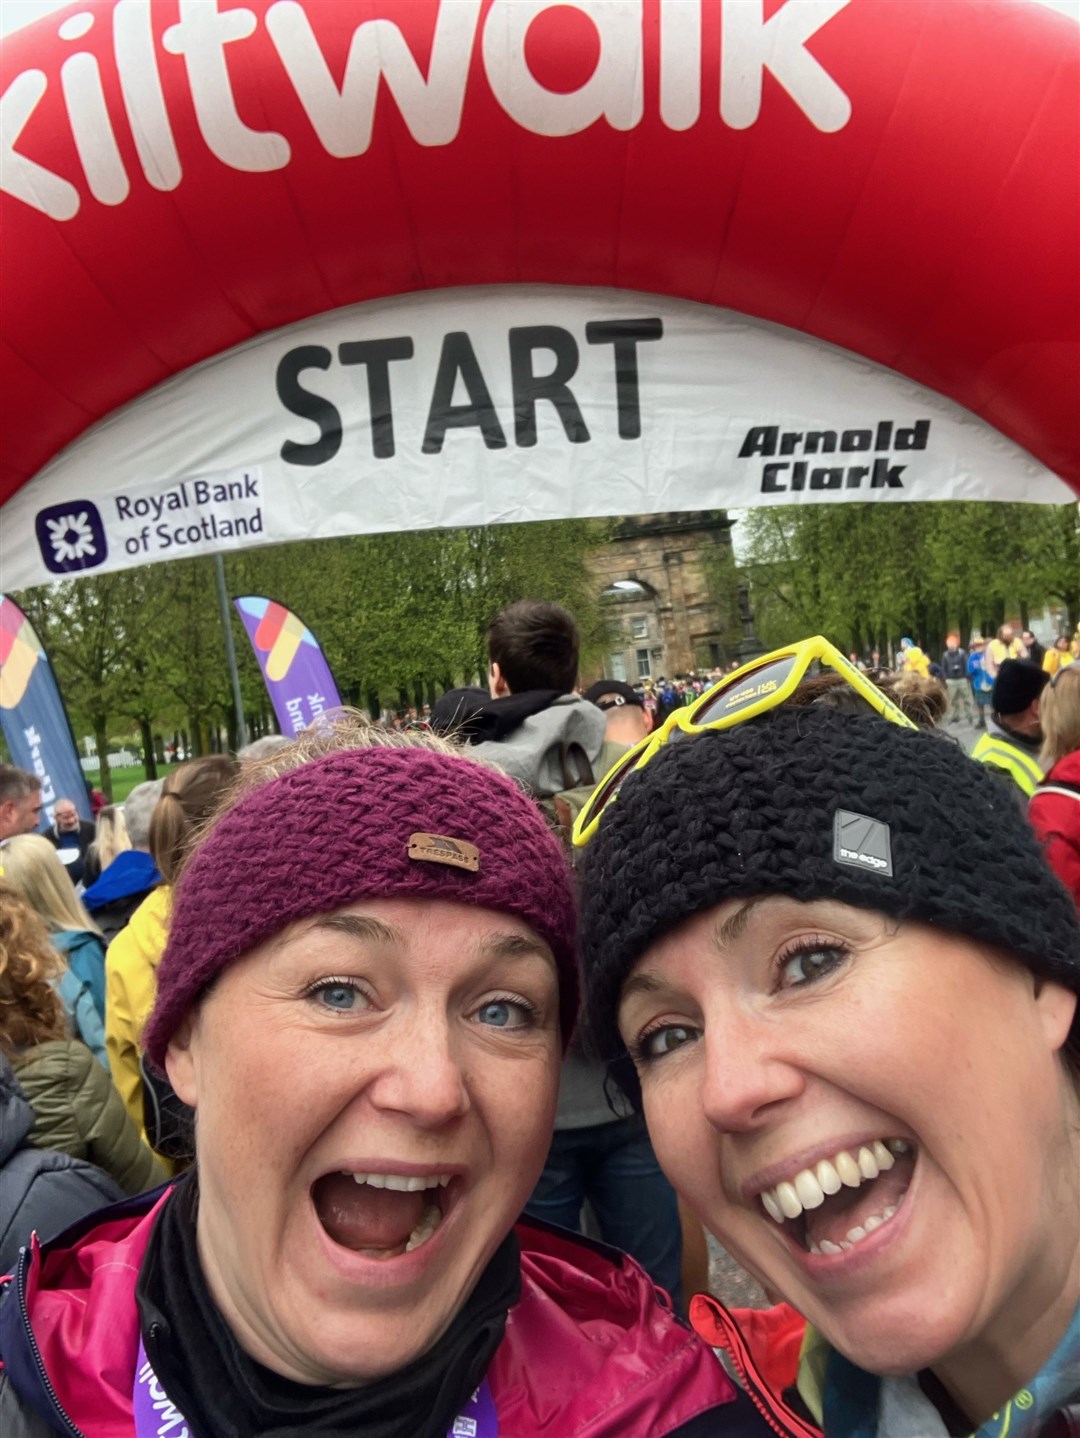 Mandy (right) and her sister Debbie on the starting line of the Glasgow Kiltwalk.